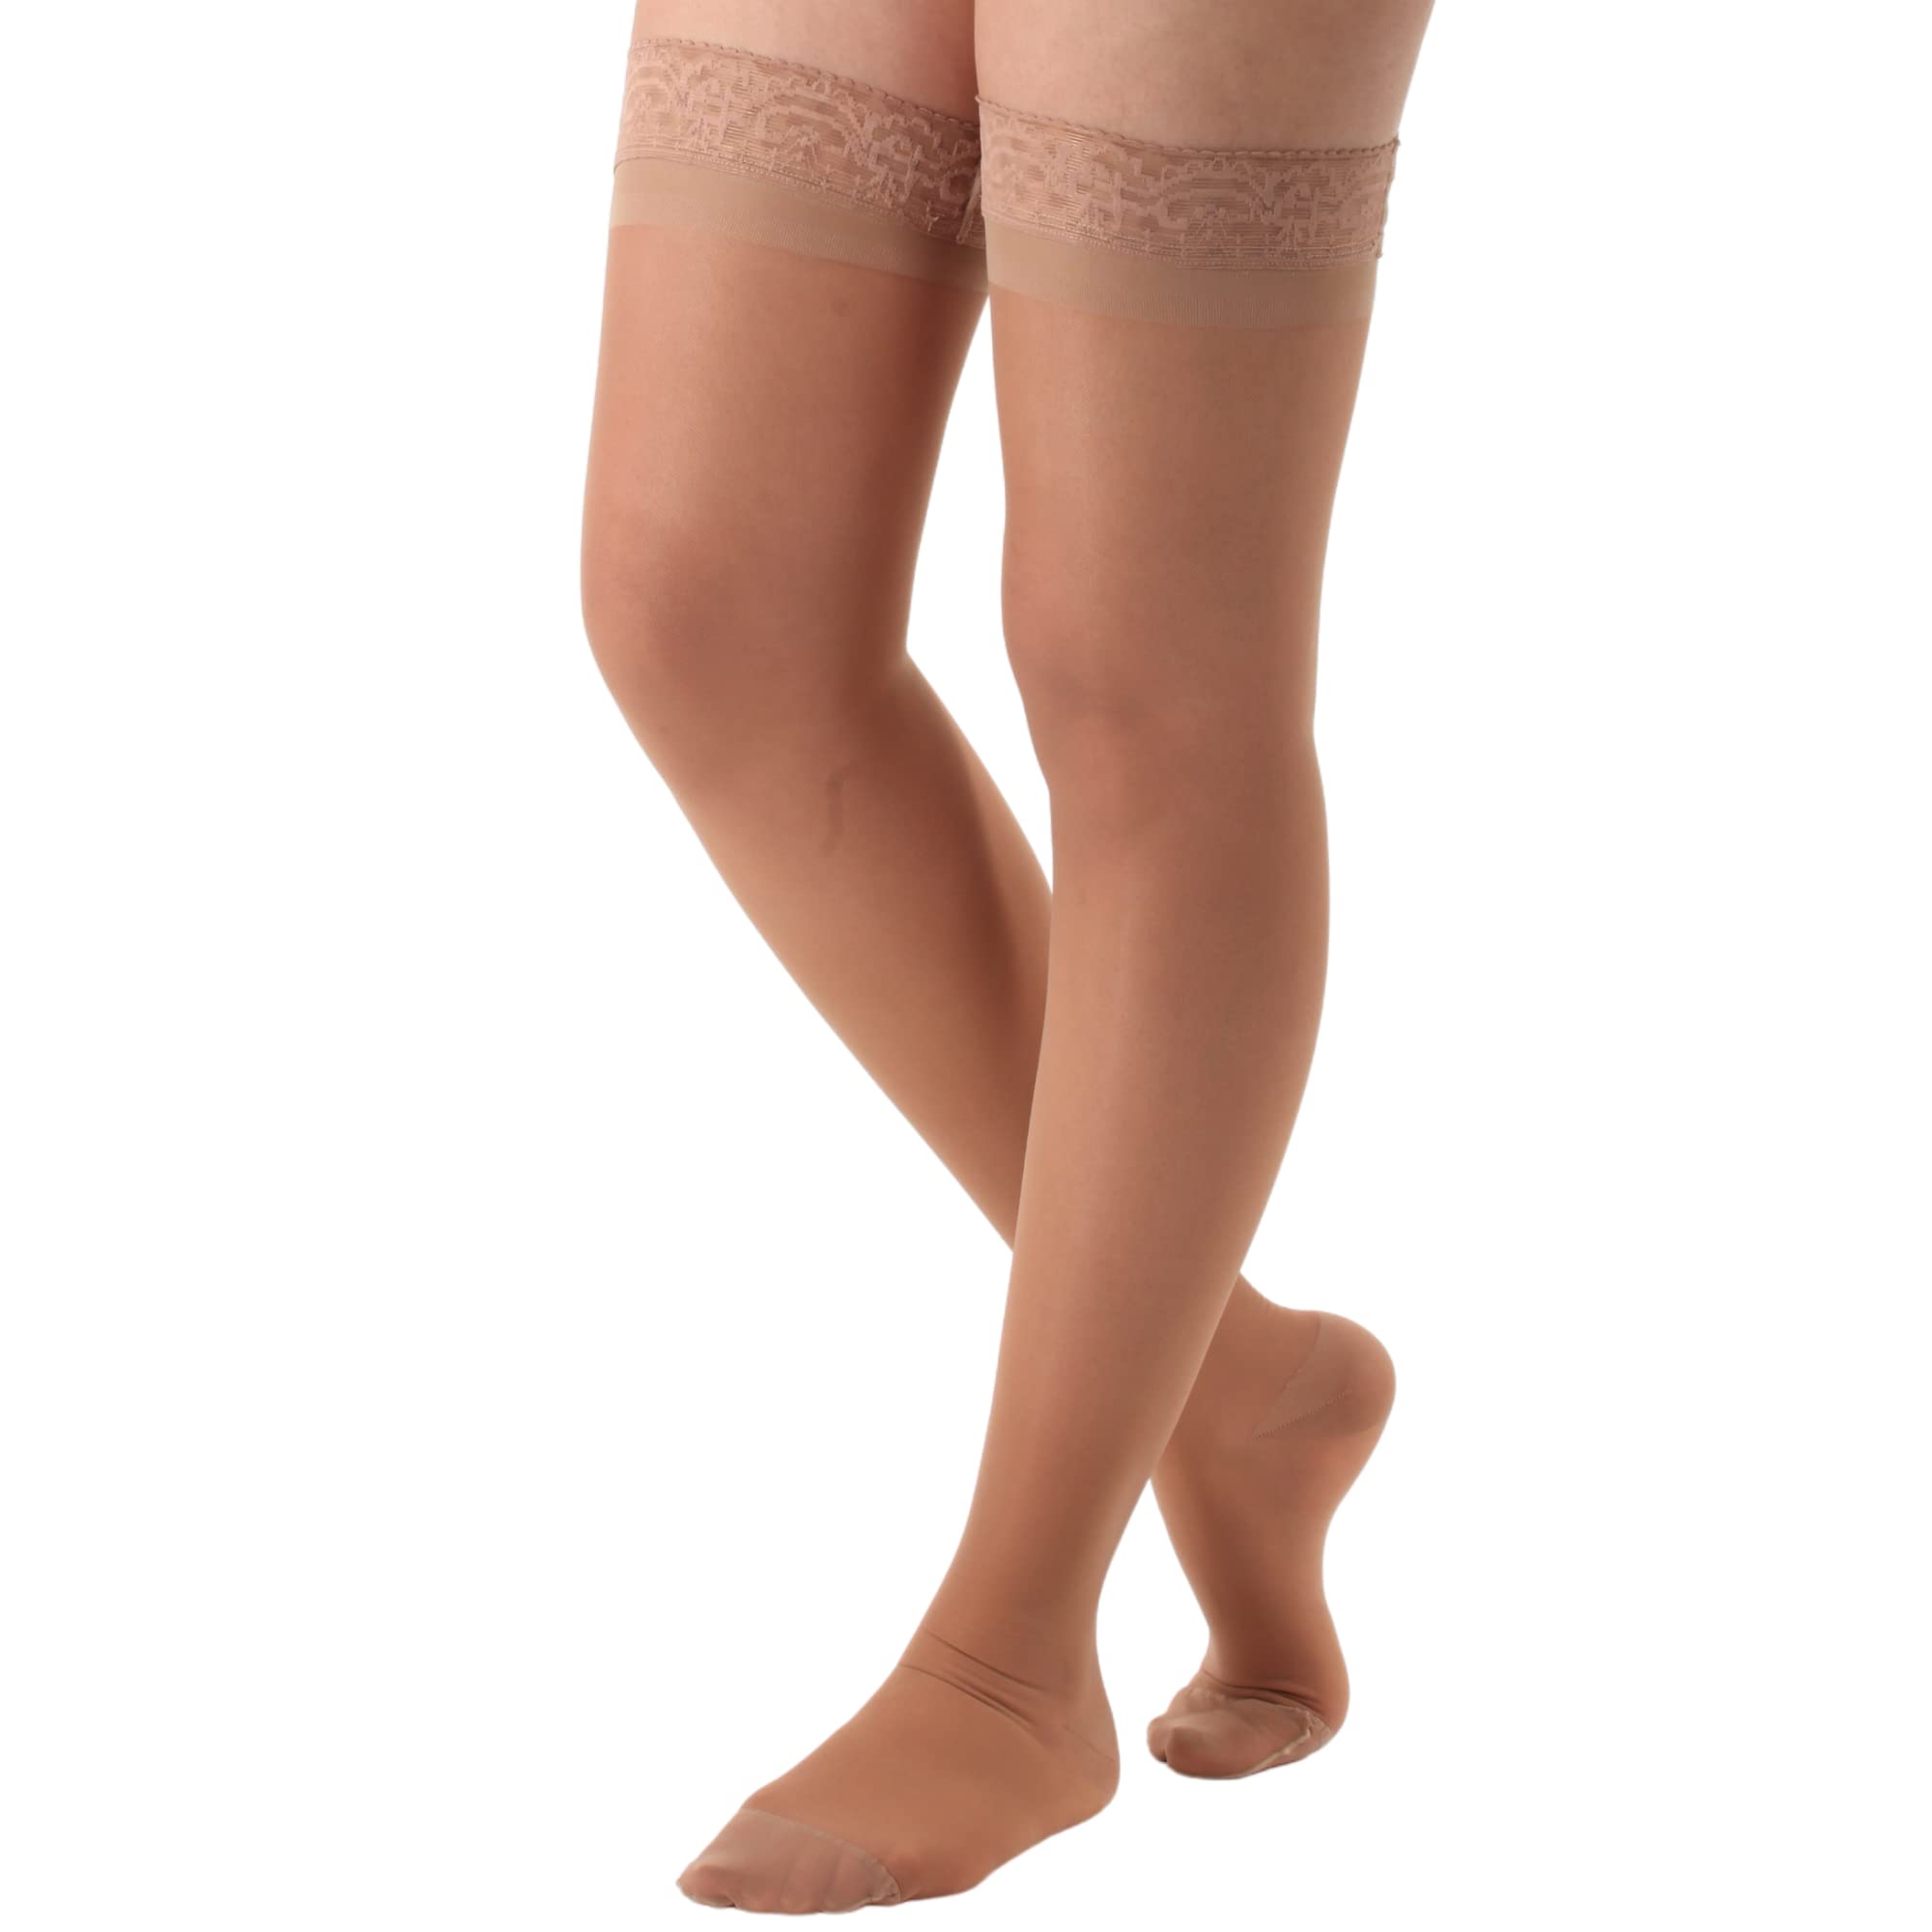 Absolute Support Microfiber Maternity Compression Pantyhose